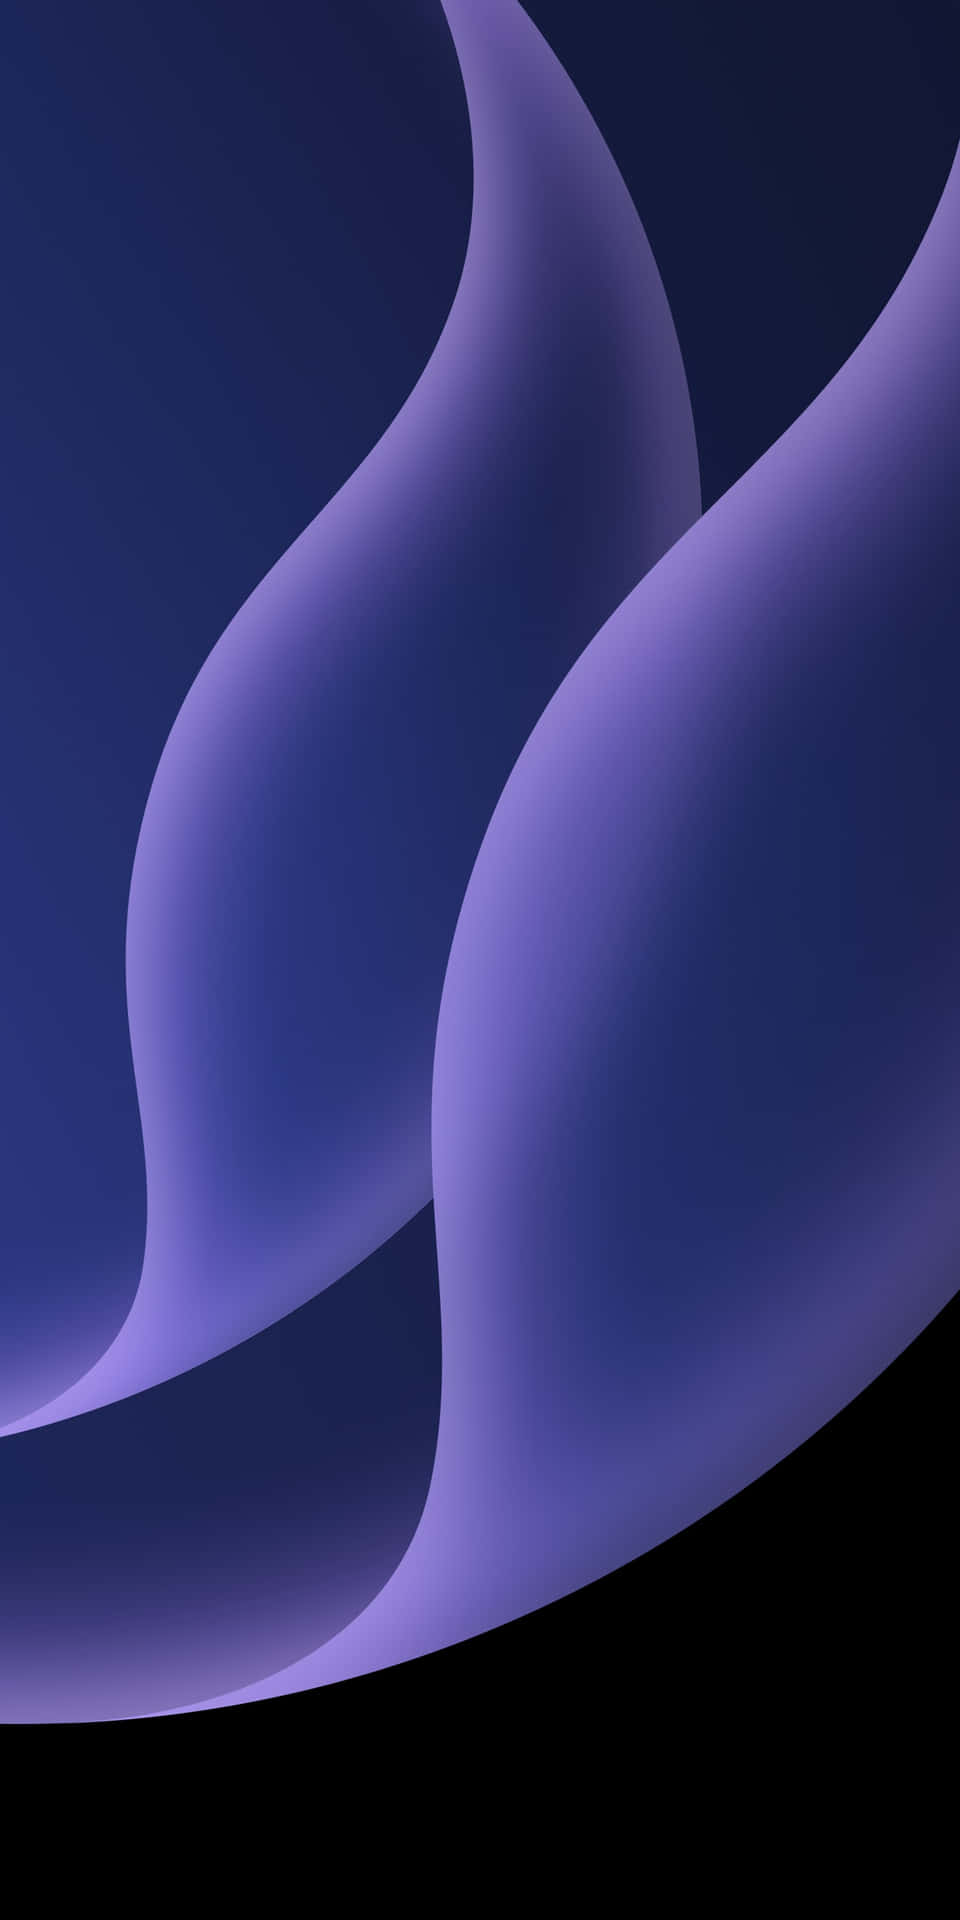 Colorful swirls of vibrant purple in an abstract pattern. Wallpaper